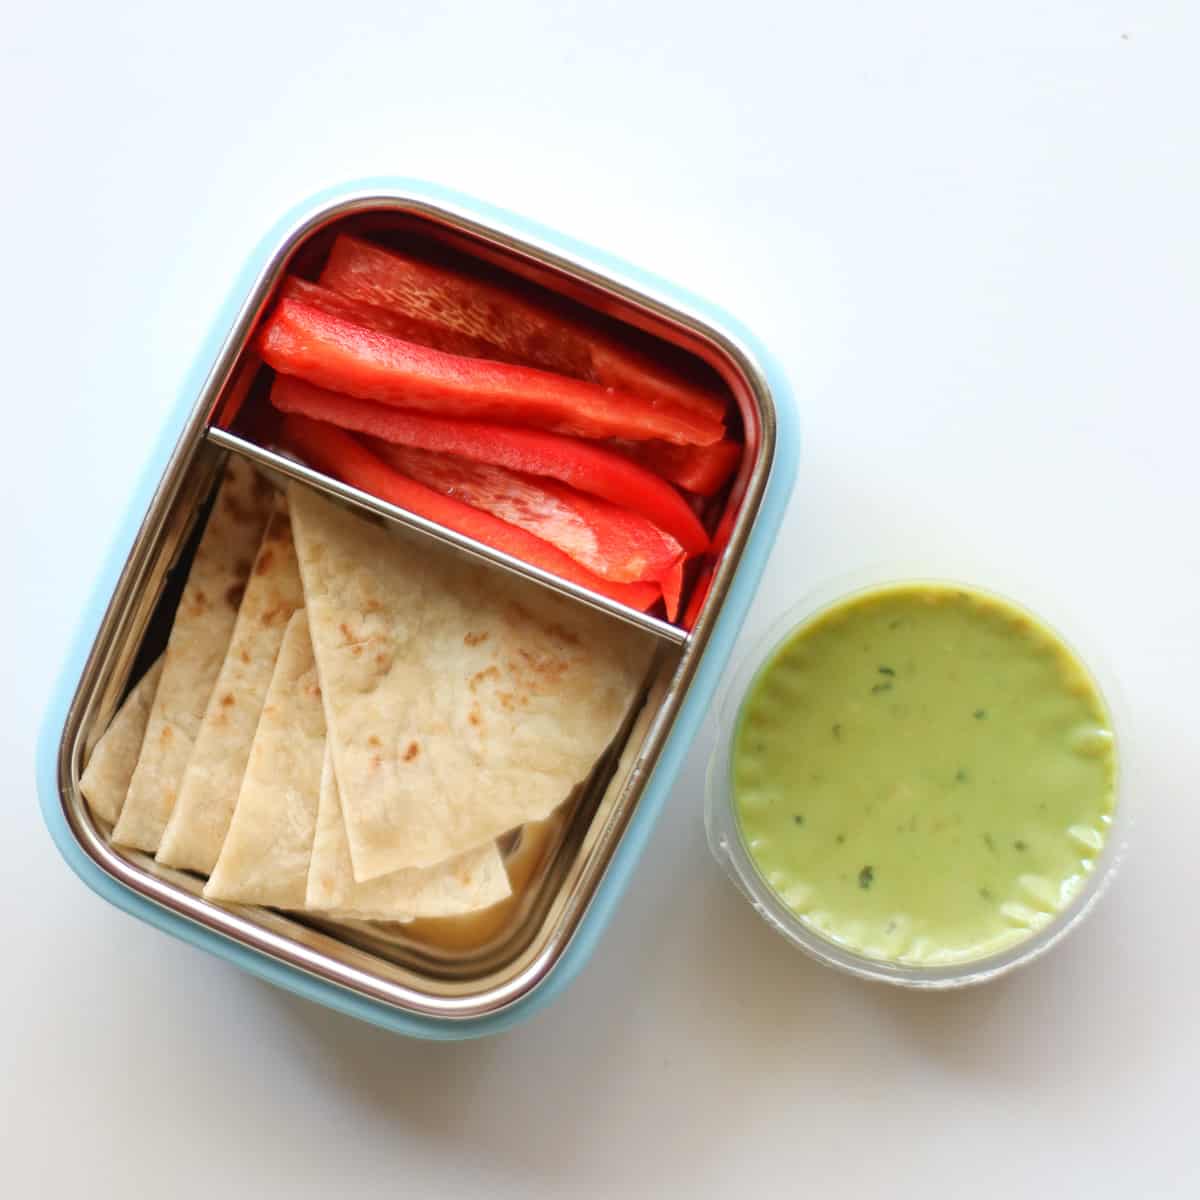 Tortilla and bell peppers in a snack container with a side of guacamole.